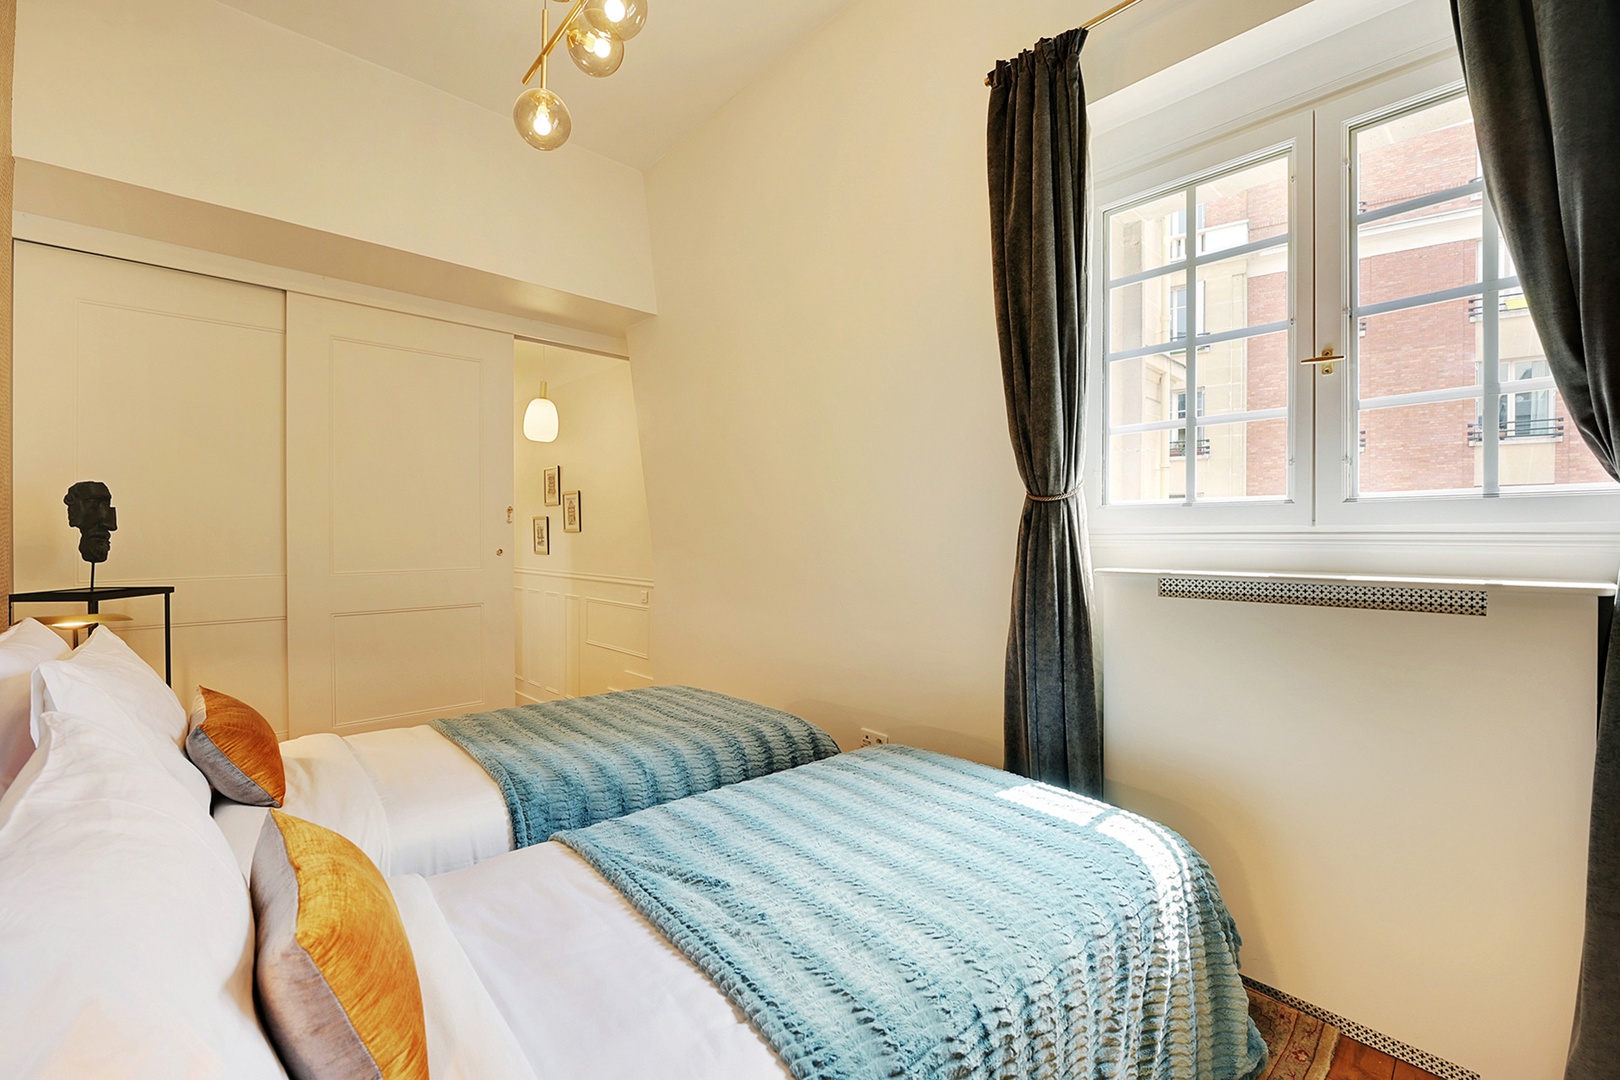 Bedroom 3 has two single beds that together form a dual extra-wide queen bed.